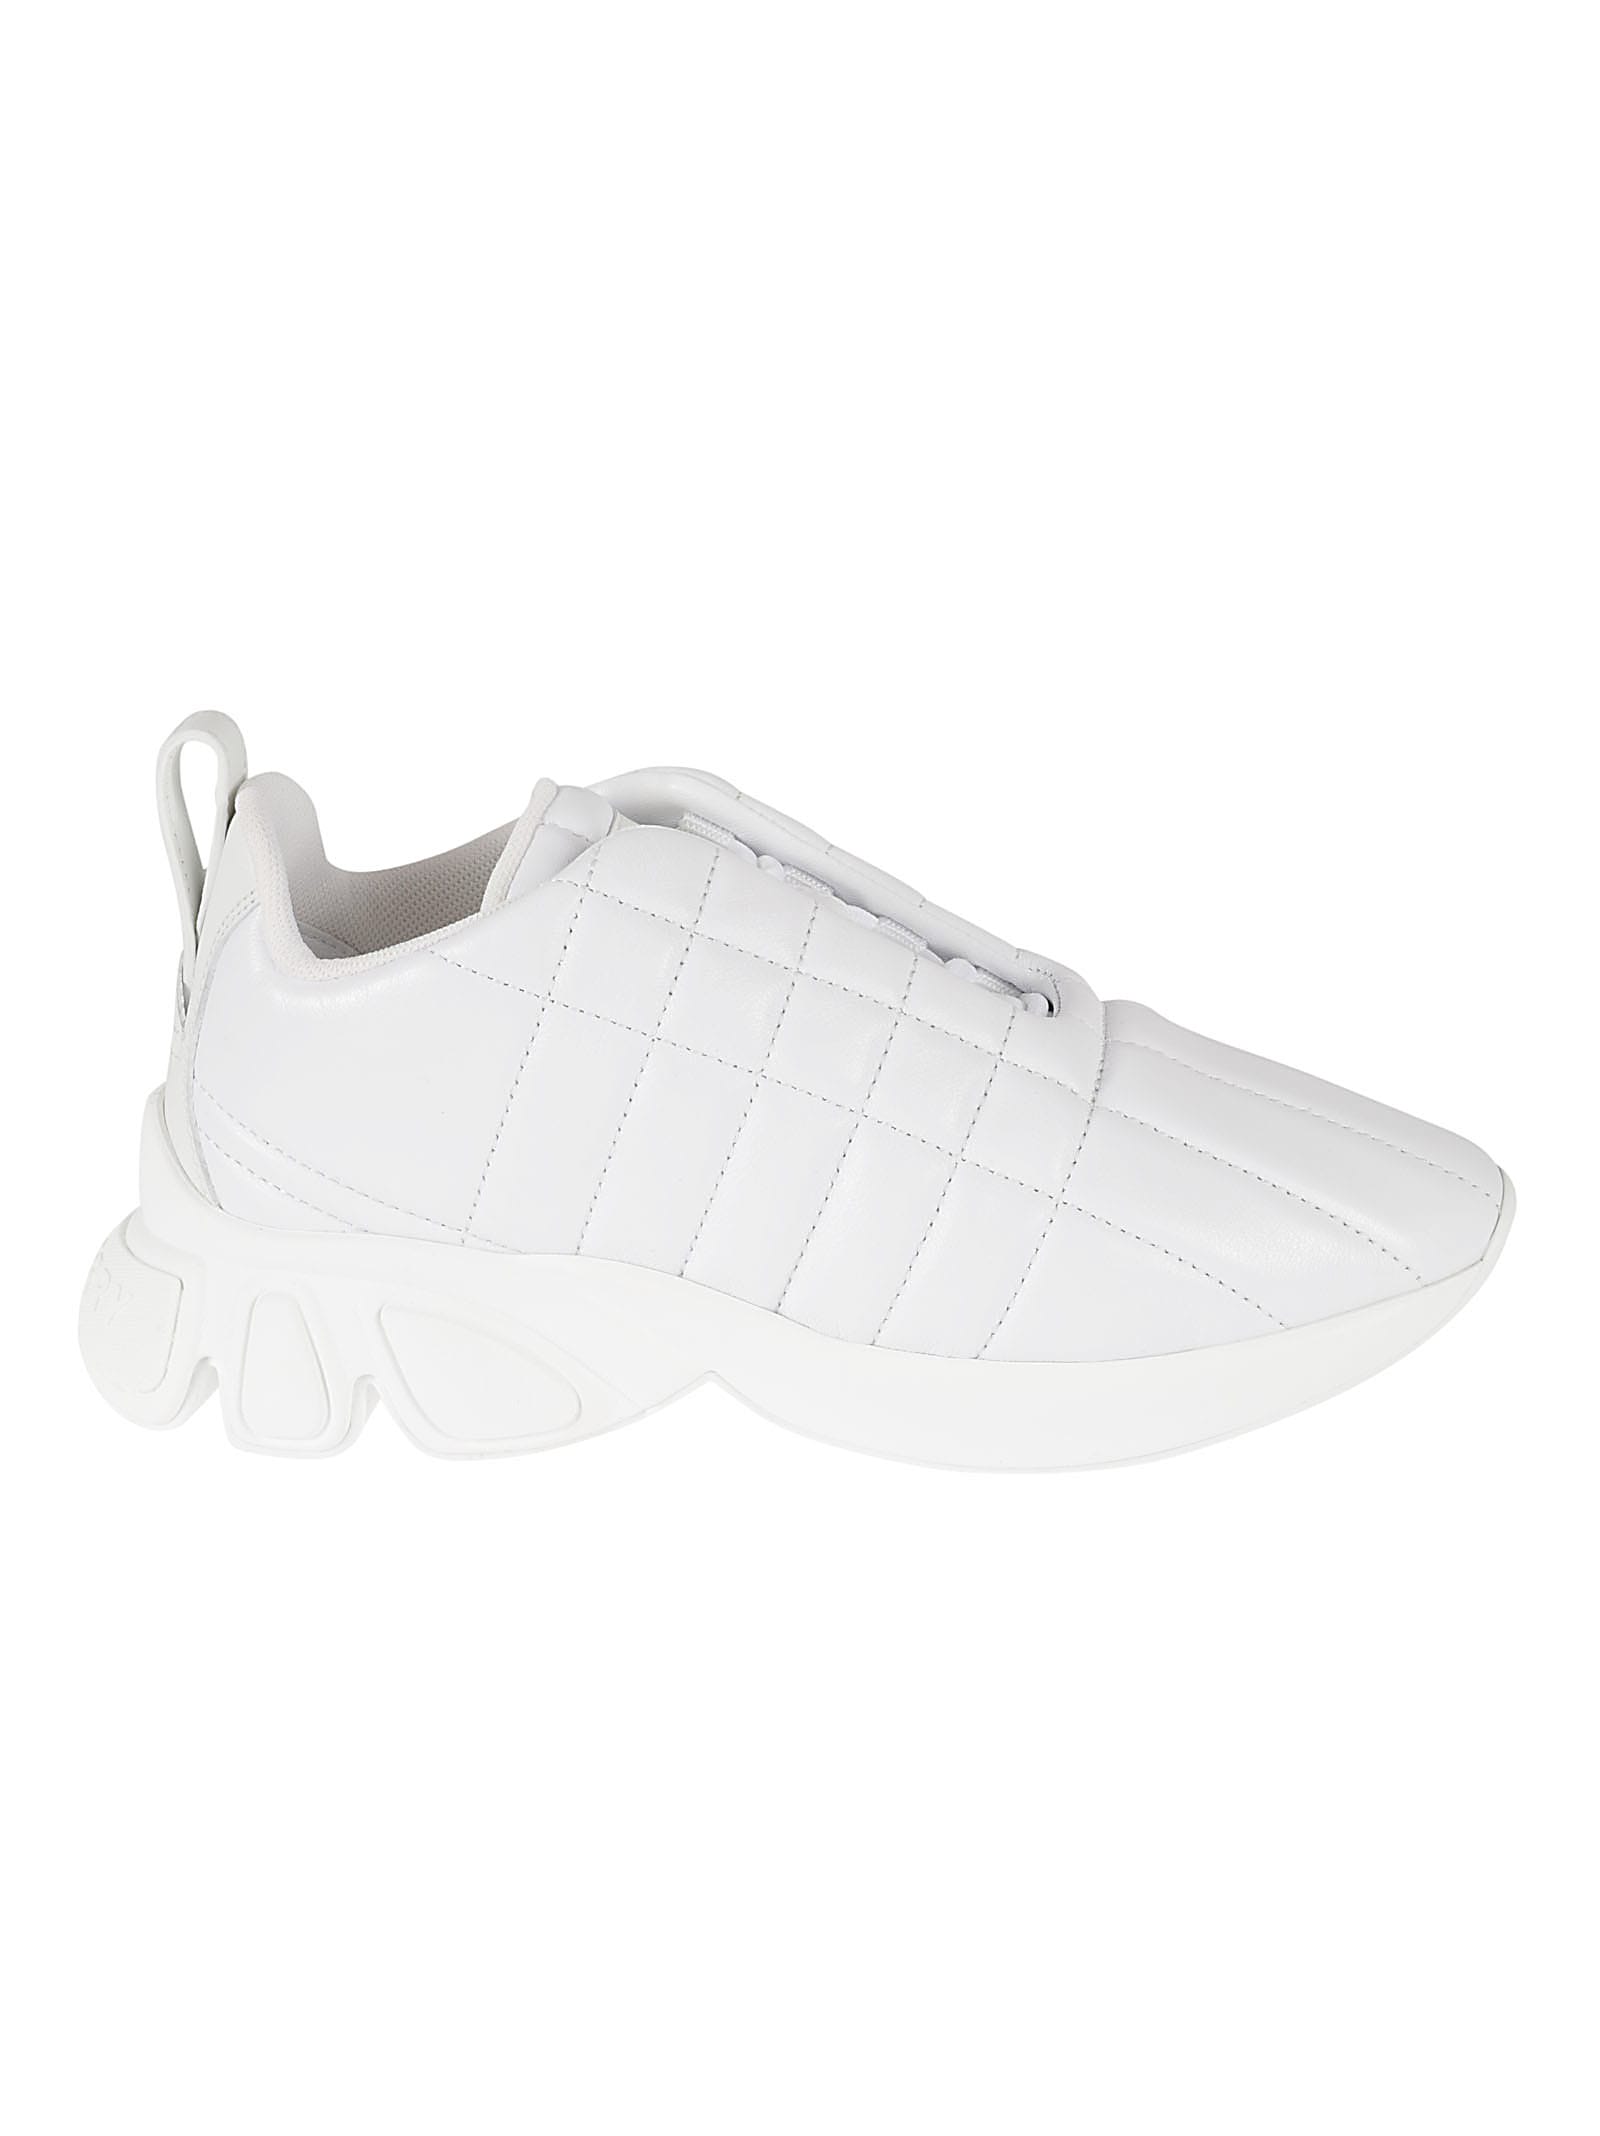 Burberry Tnr Axburton Quilted Sneakers